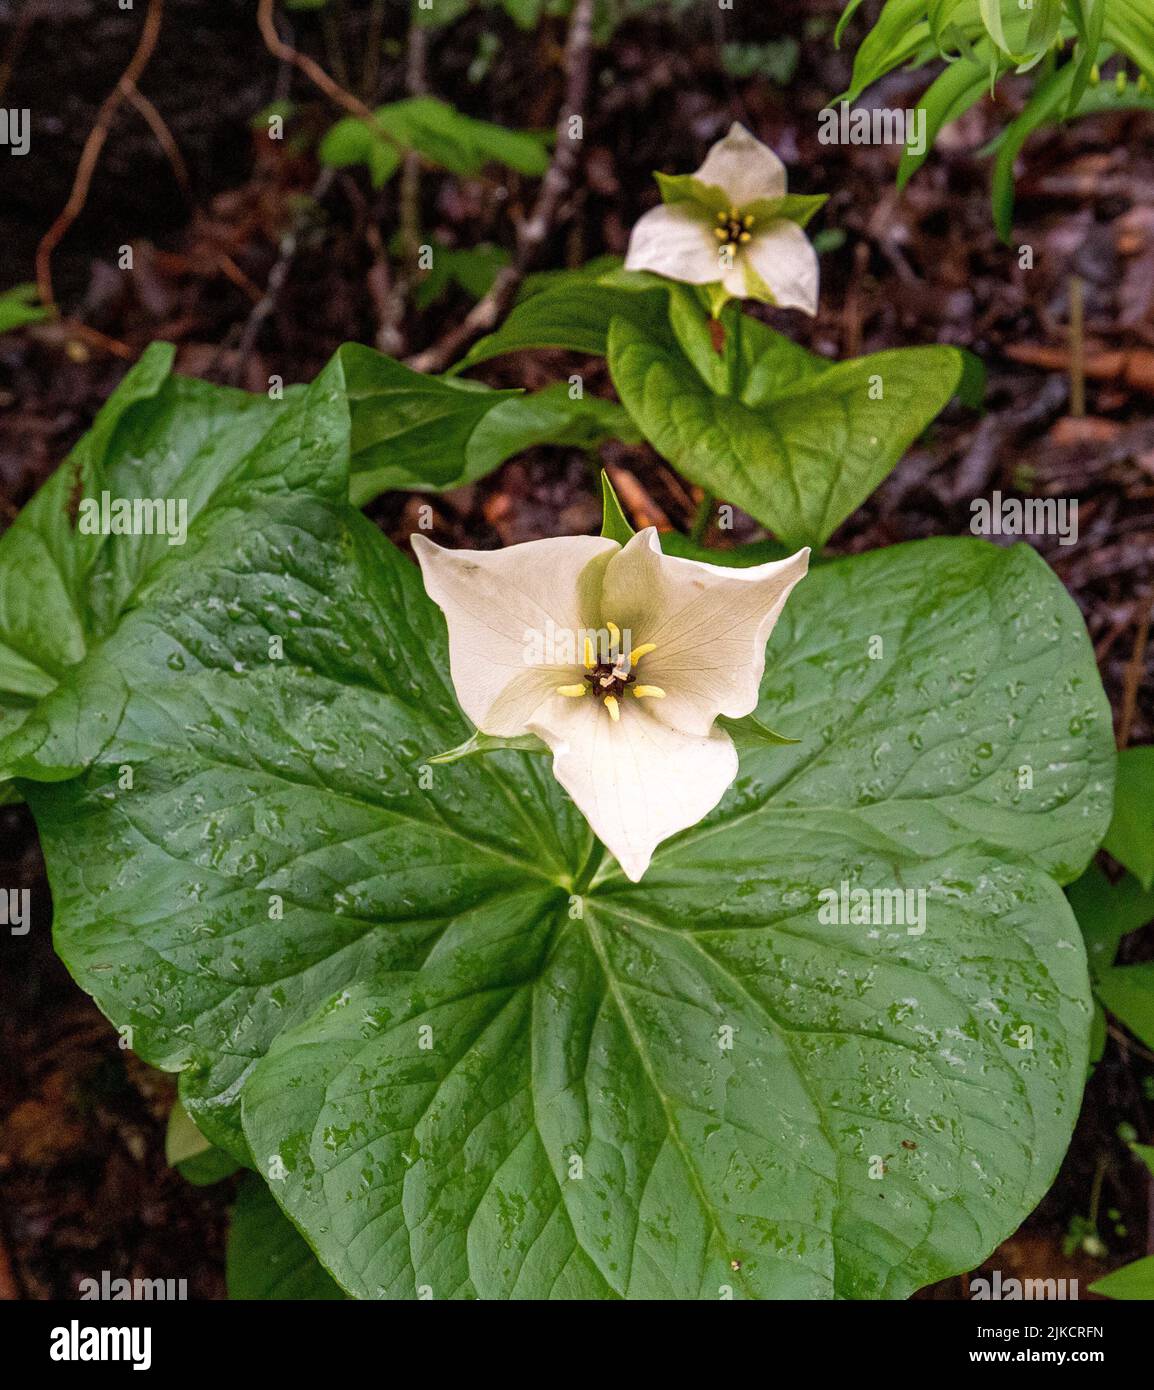 The white trillium flowers with green leaves Stock Photo